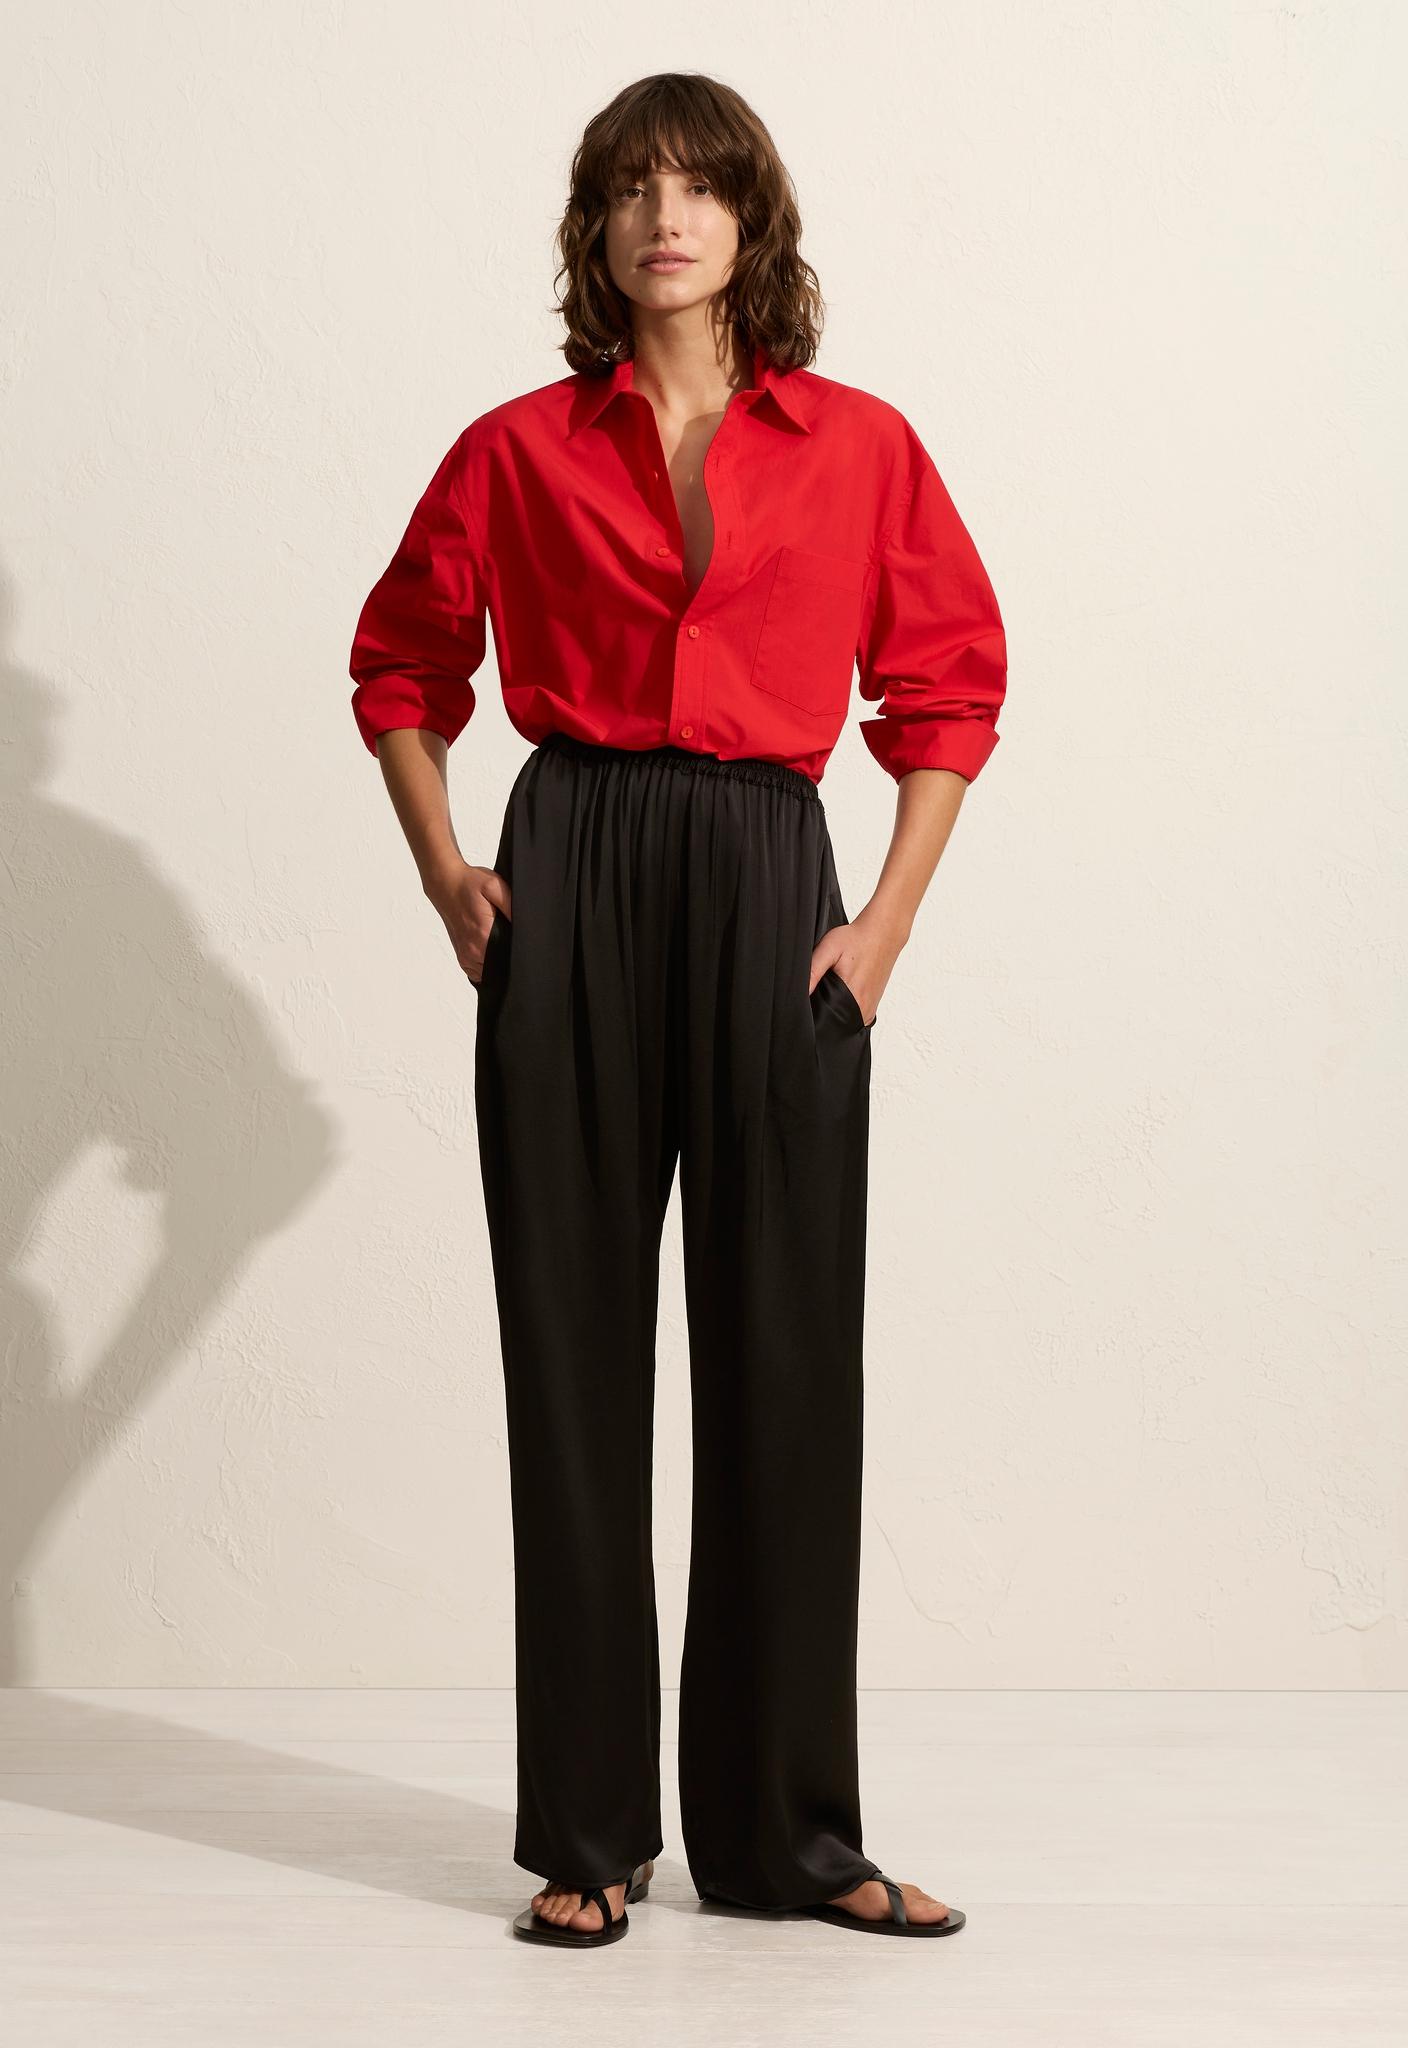 Relaxed Shirt - Rosso - Matteau